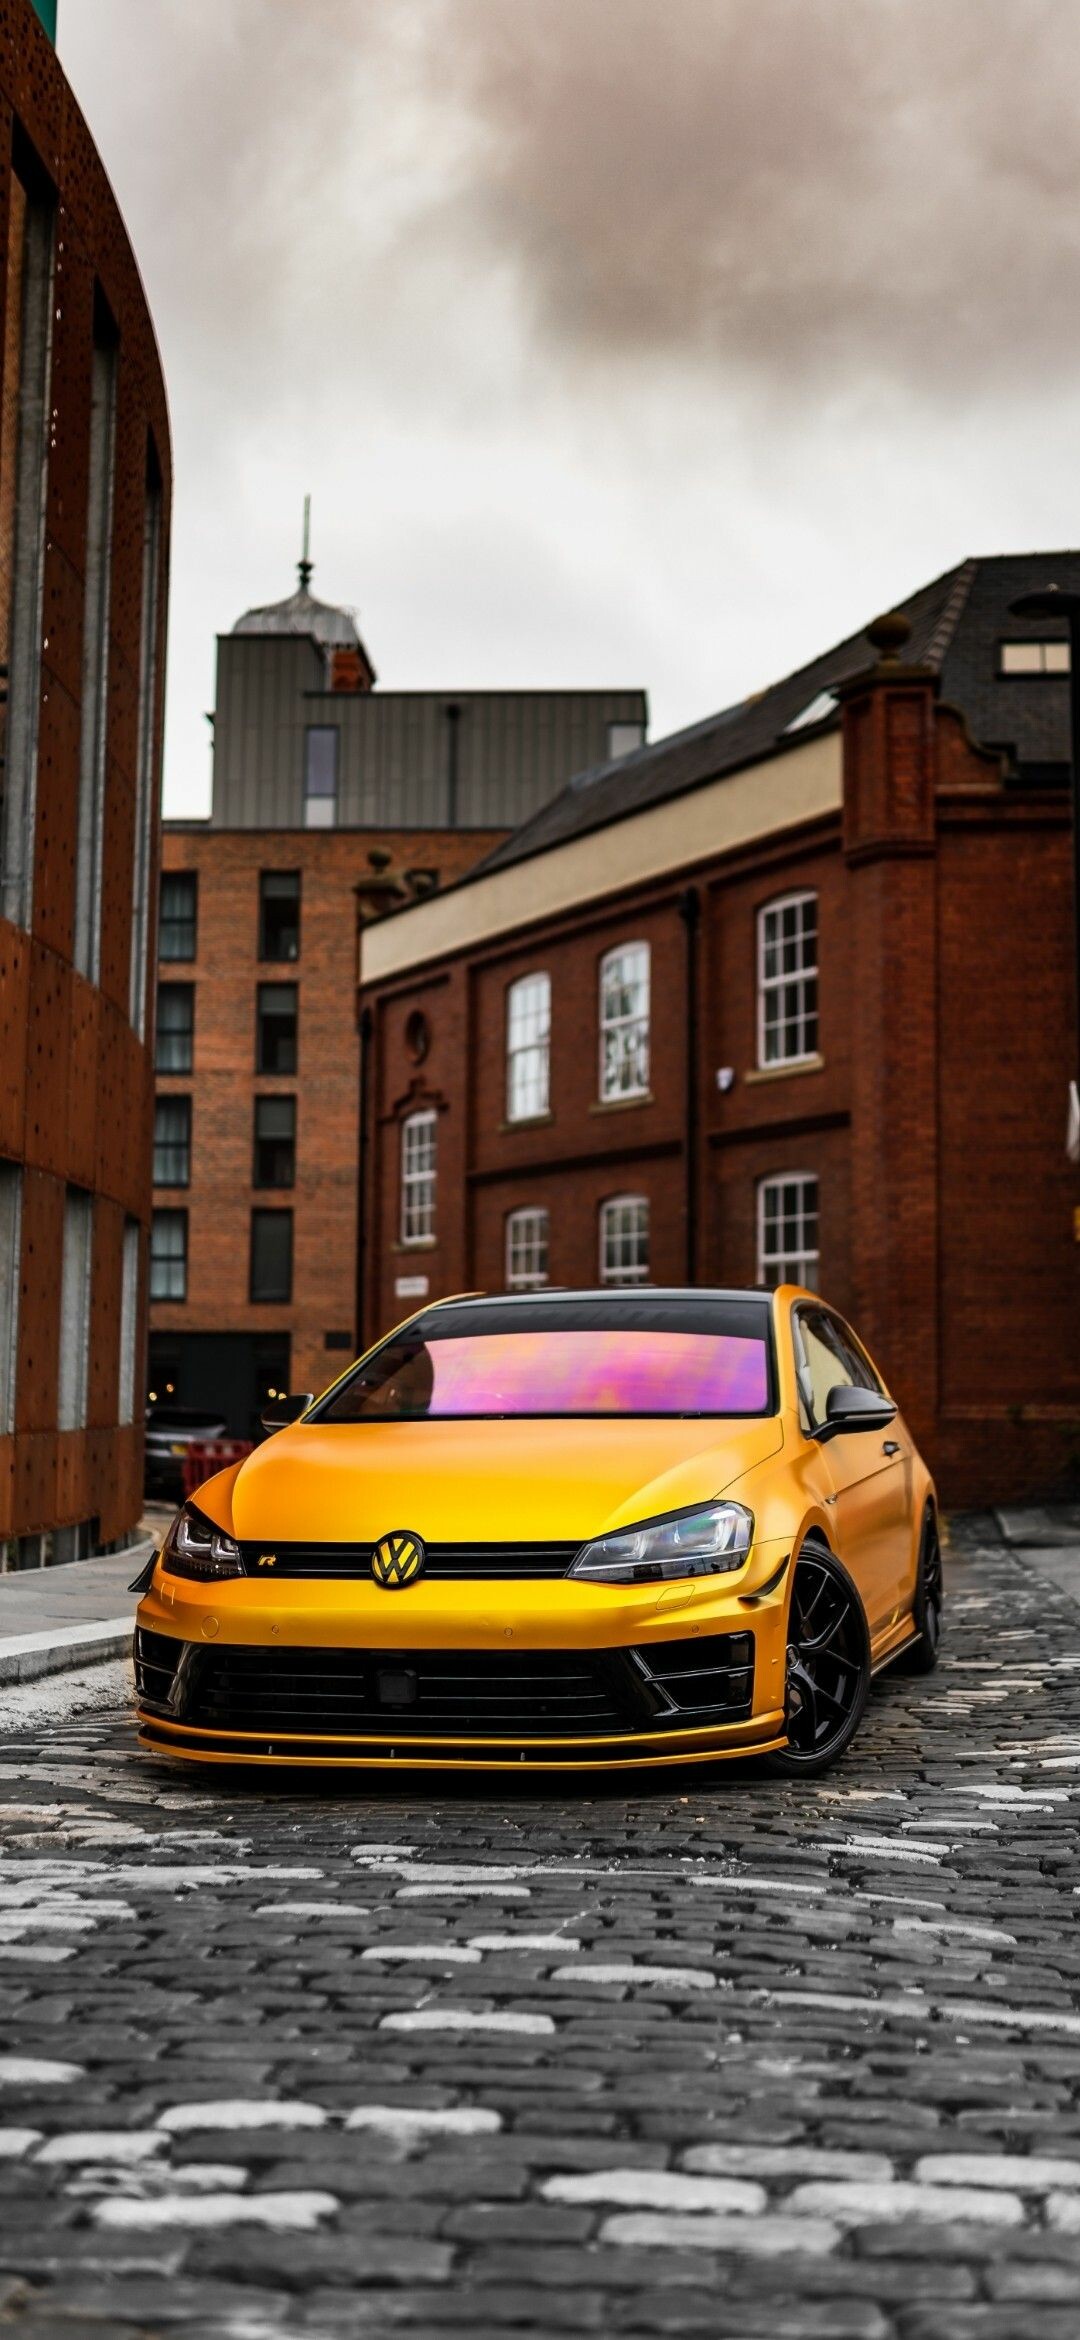 Volkswagen: VW AG, An automobile manufacturer based in Wolfsburg, Germany. 1080x2340 HD Wallpaper.